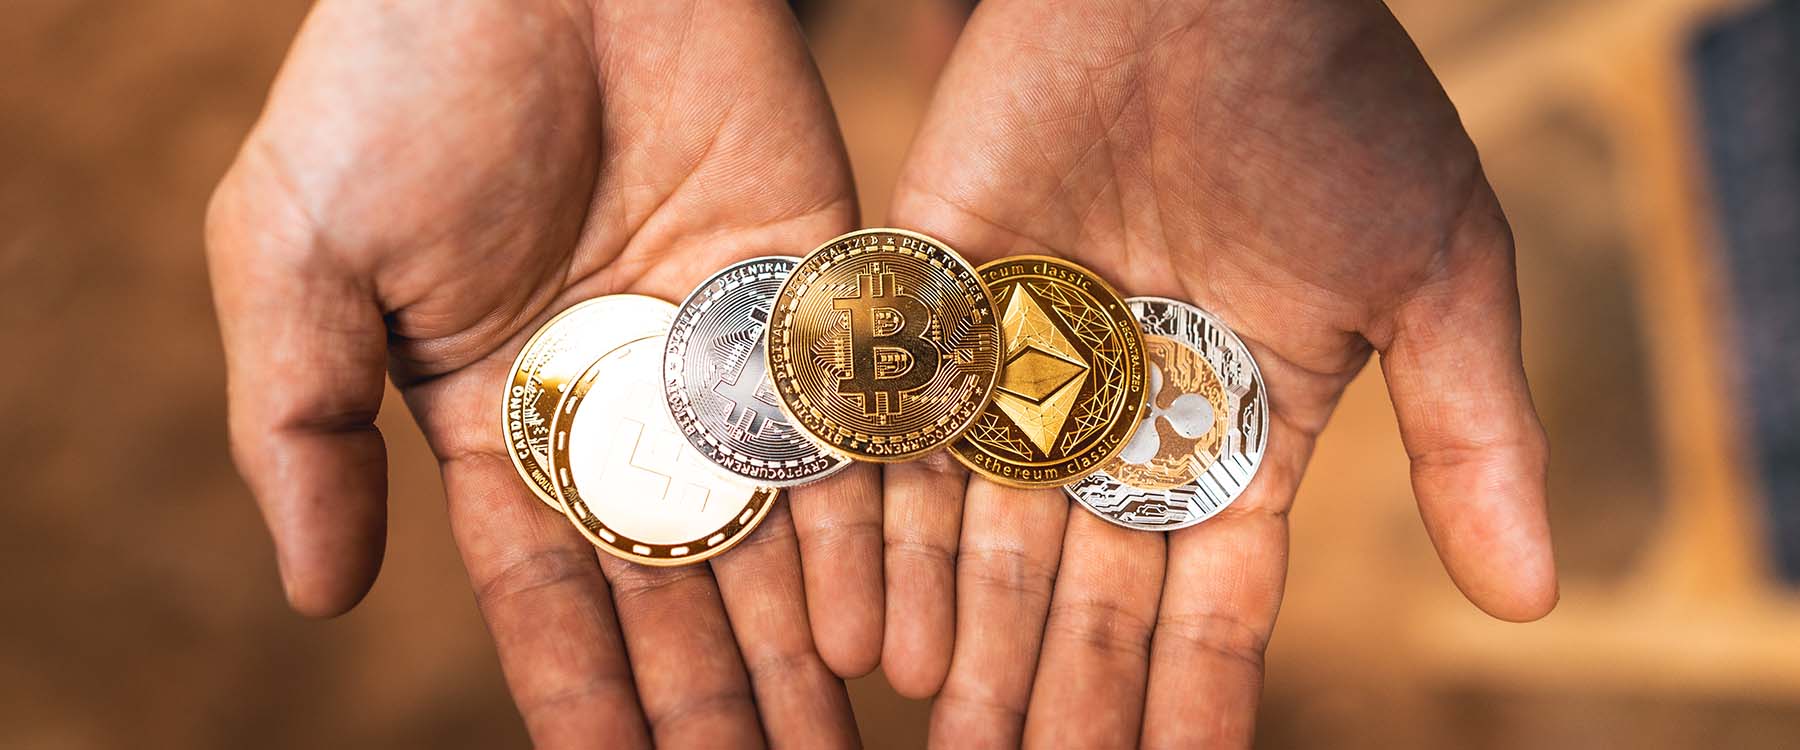 man's hands holding crytpocurrency coins